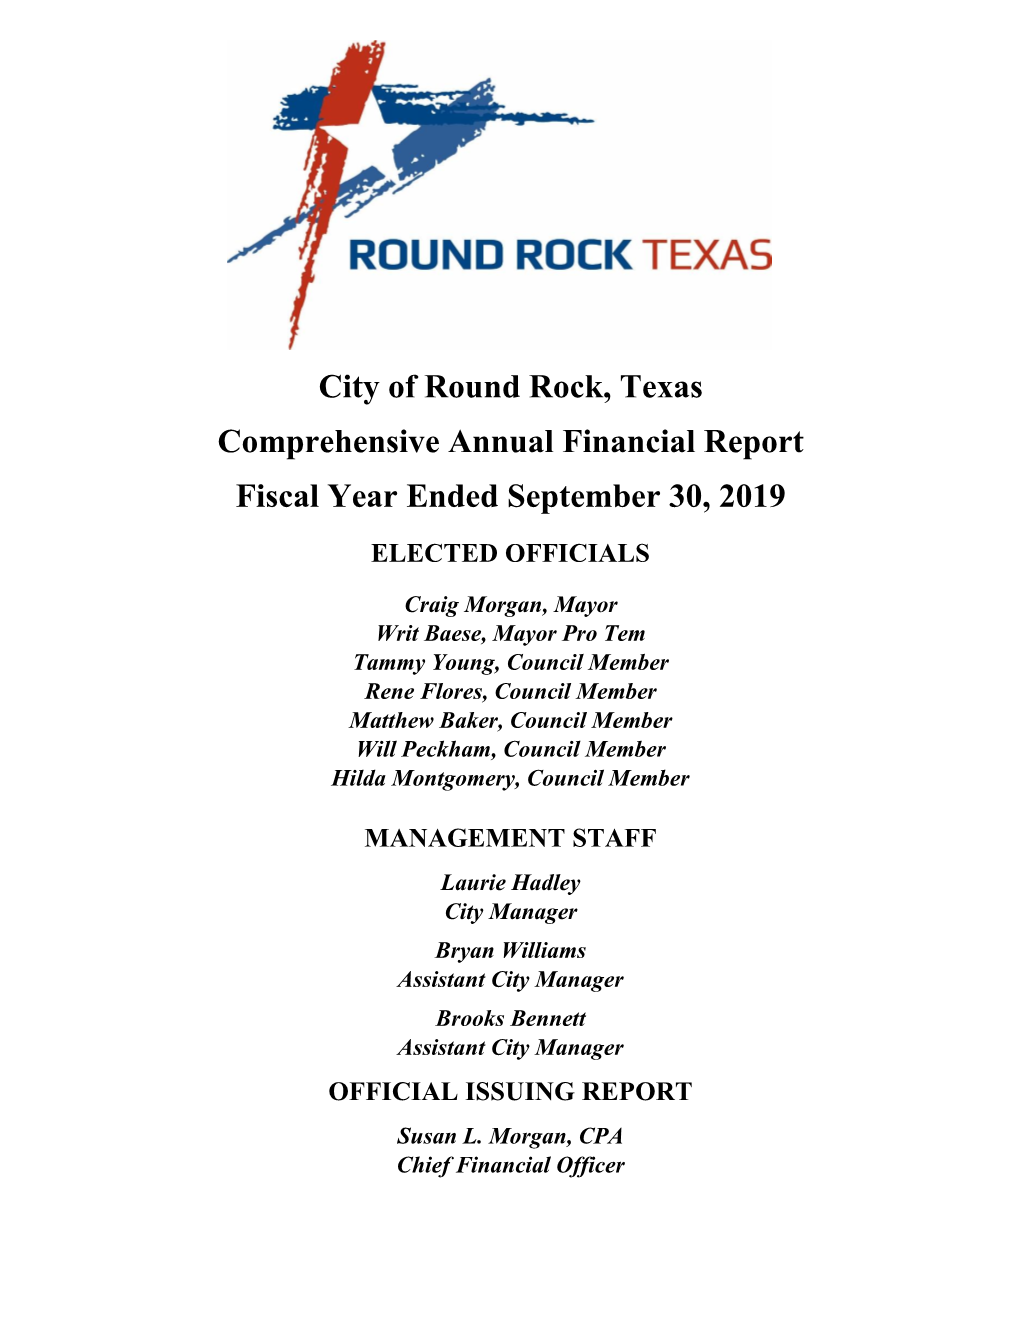 City of Round Rock, Texas Comprehensive Annual Financial Report Fiscal Year Ended September 30, 2019